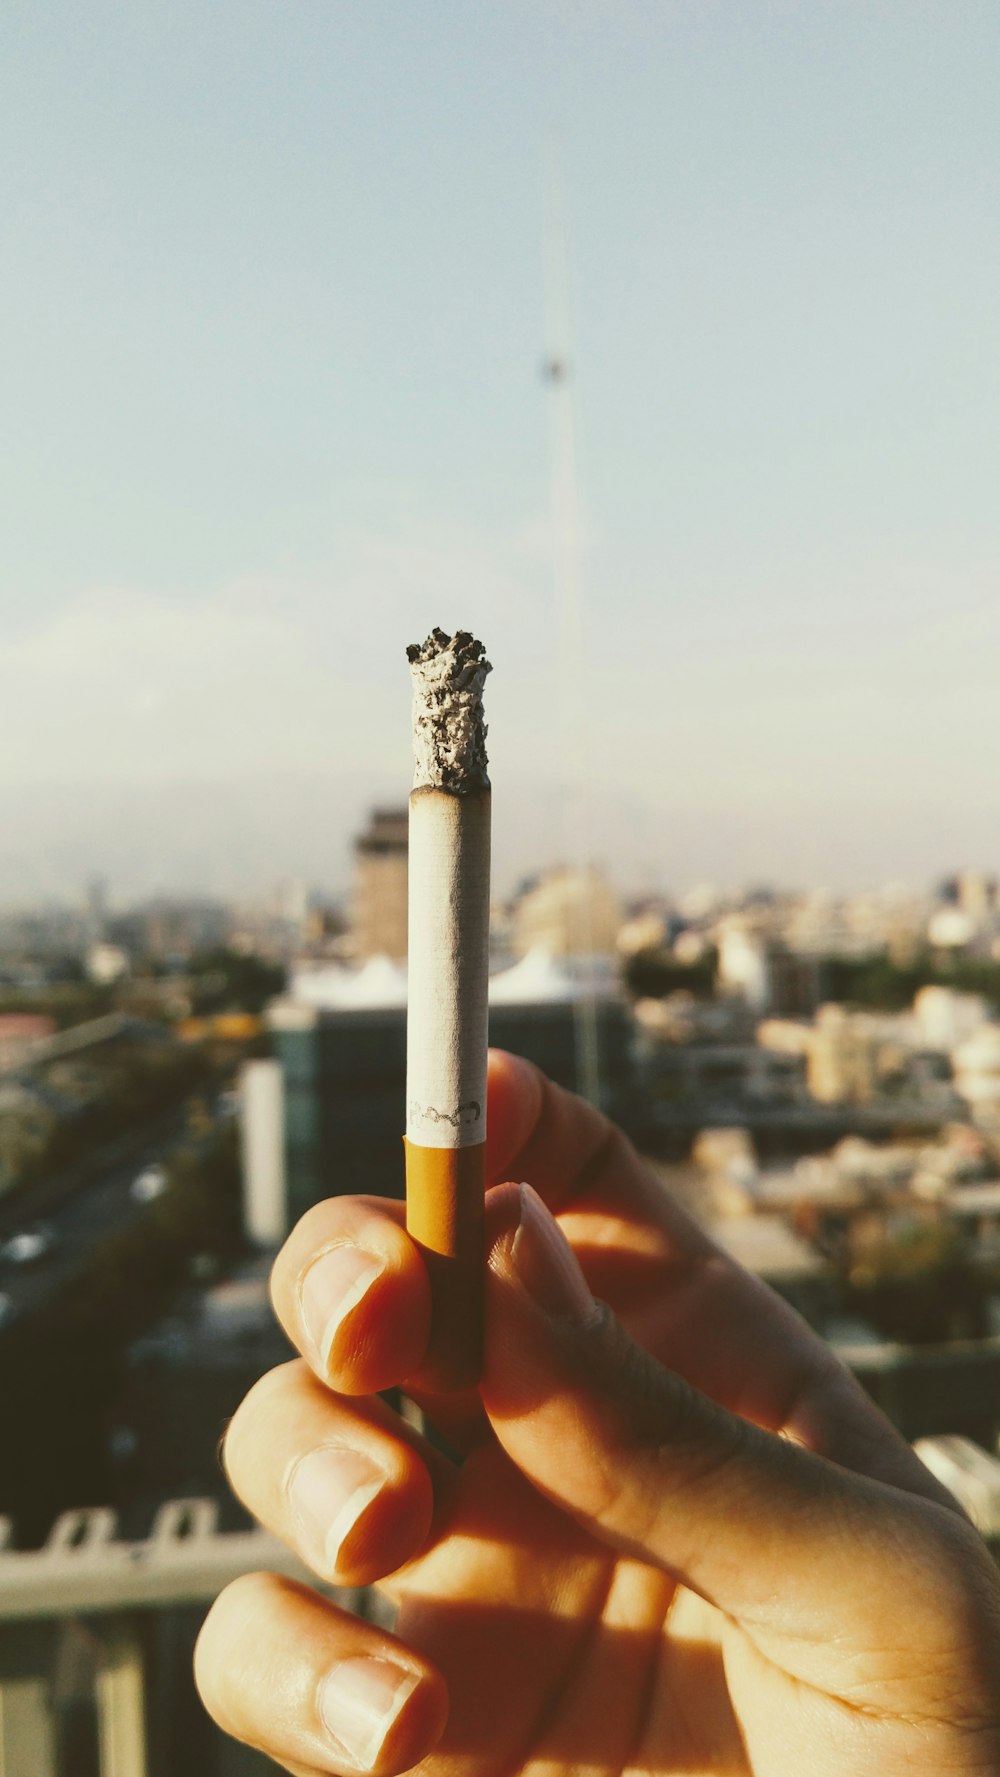 Smoking Pictures Download Free Images On Unsplash Sometimes it is just a cool selfie in different poses, and pictures of different in this momjunction post, we give you a list of whatsapp dp ideas for boys to choose from and use on their social profile. smoking pictures download free images